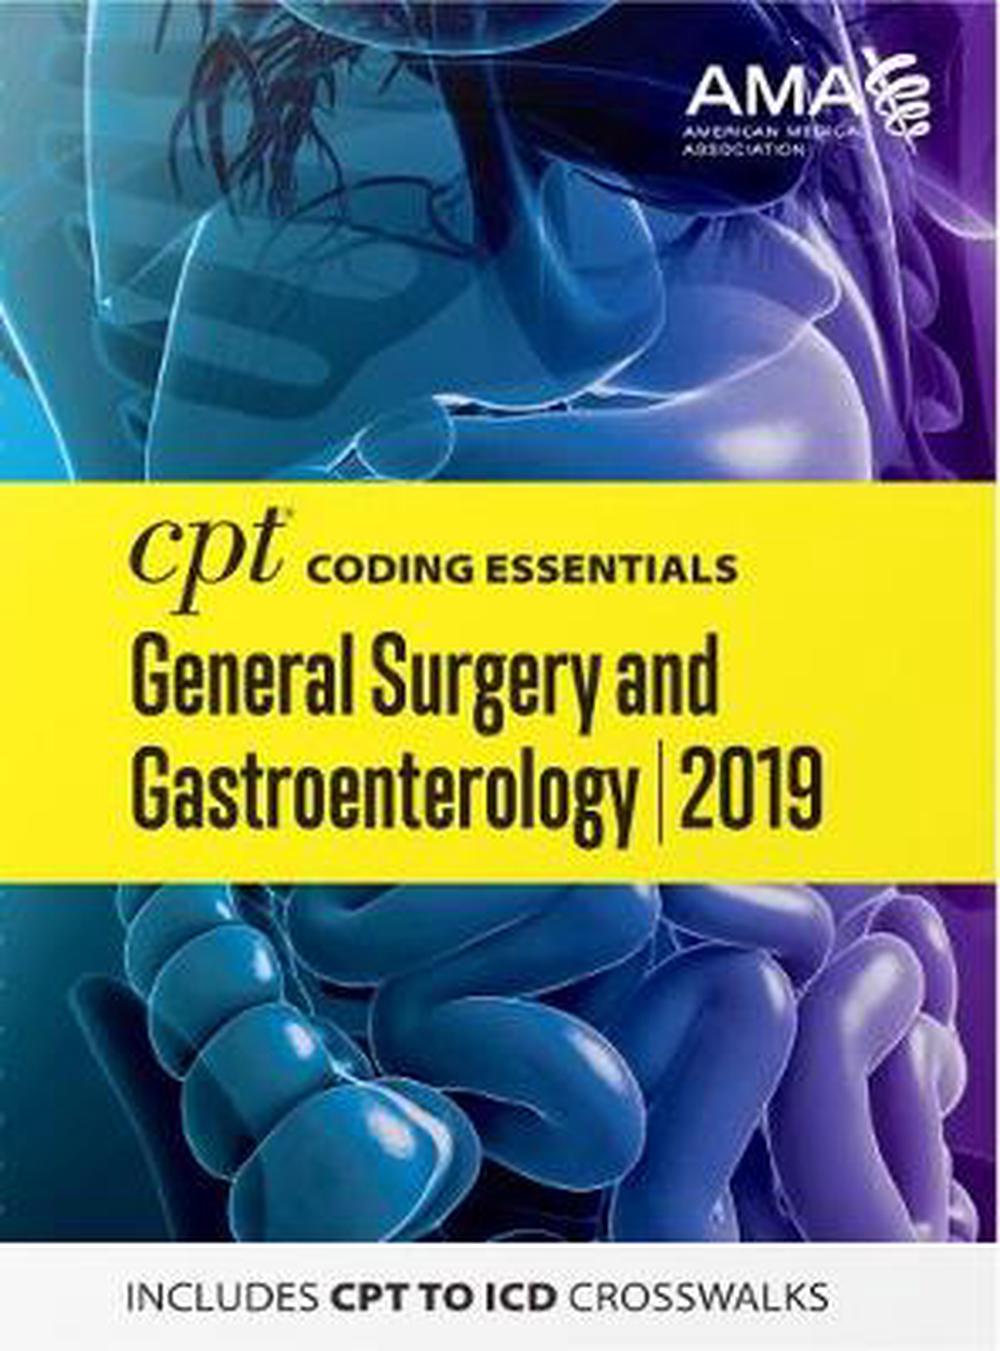 CPT Coding Essentials for General Surgery and Gastroenterology 2019 by